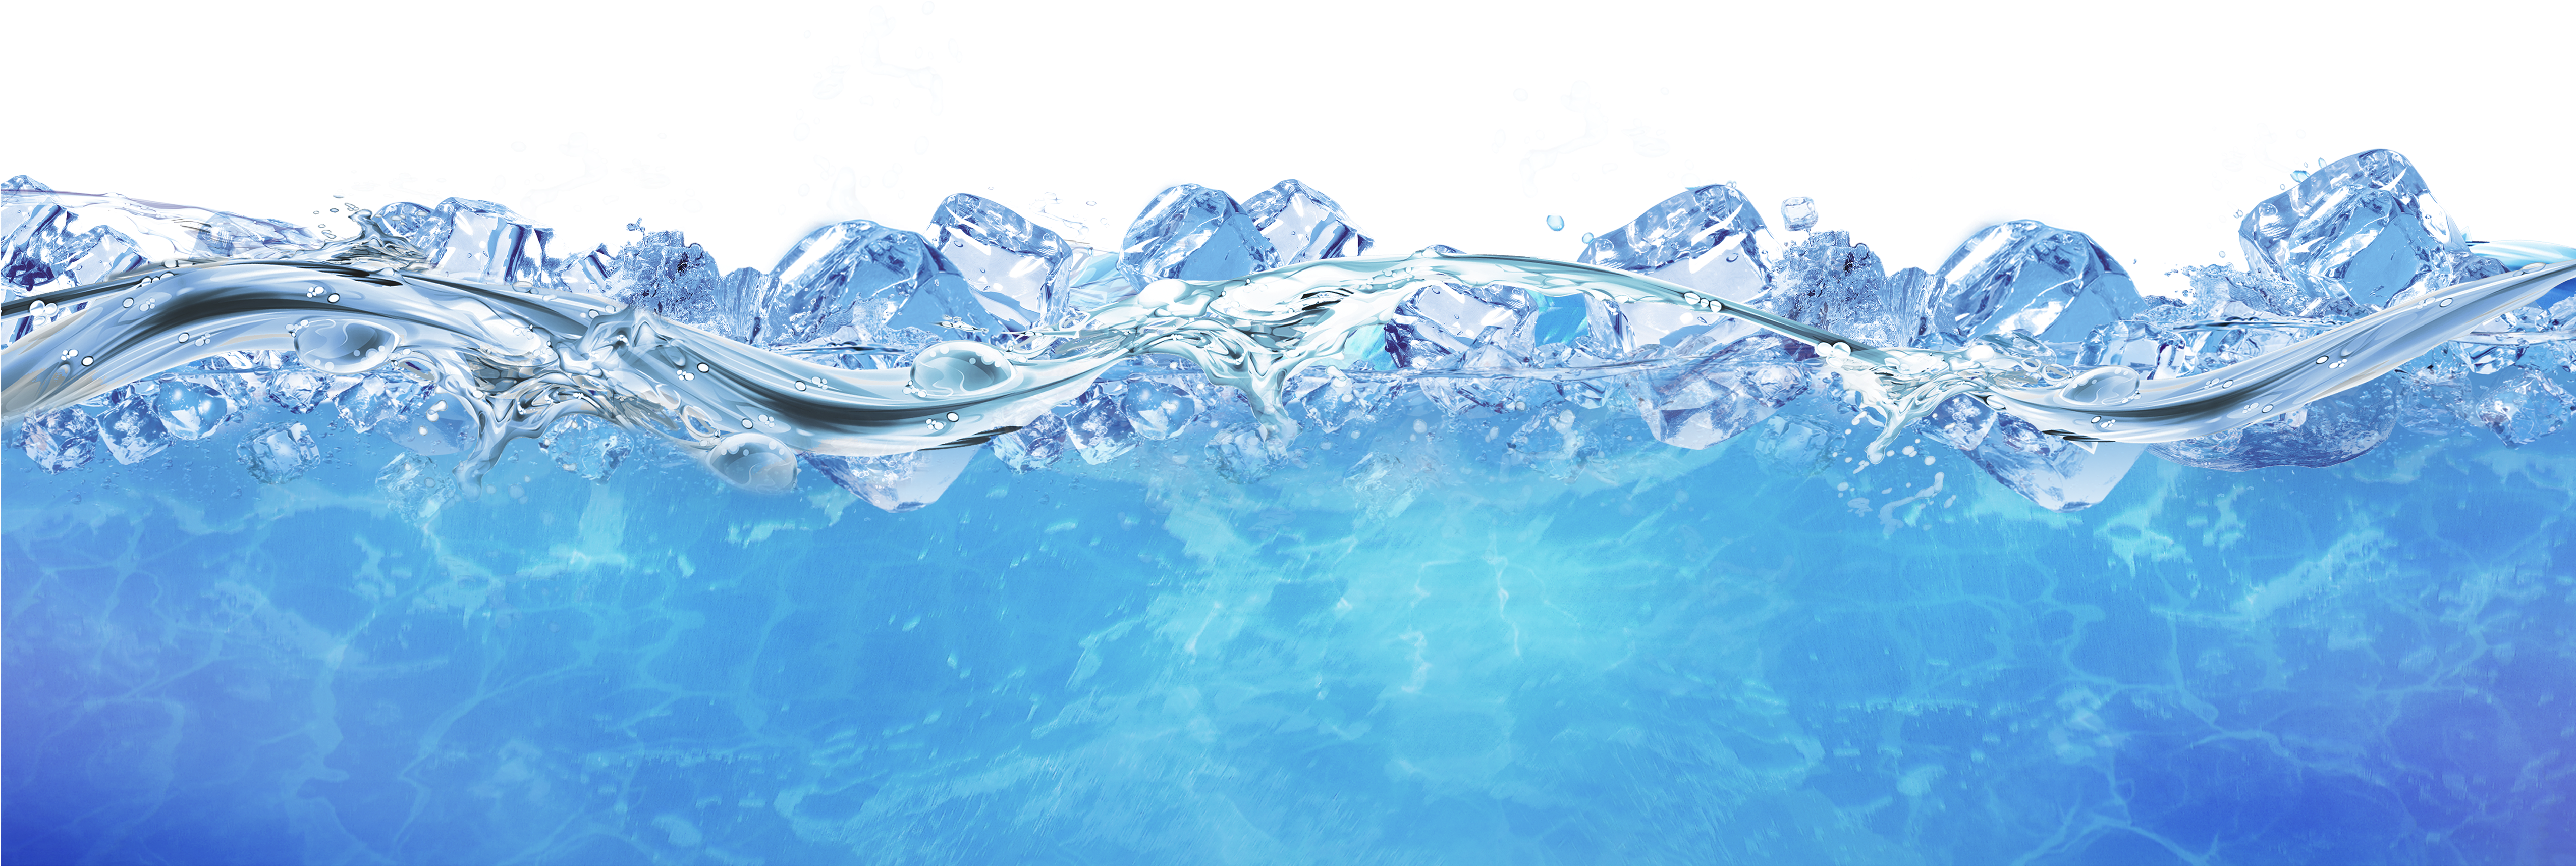 Blue Ice Floats On - Water Texture Png Download (5104x1856), Png Download